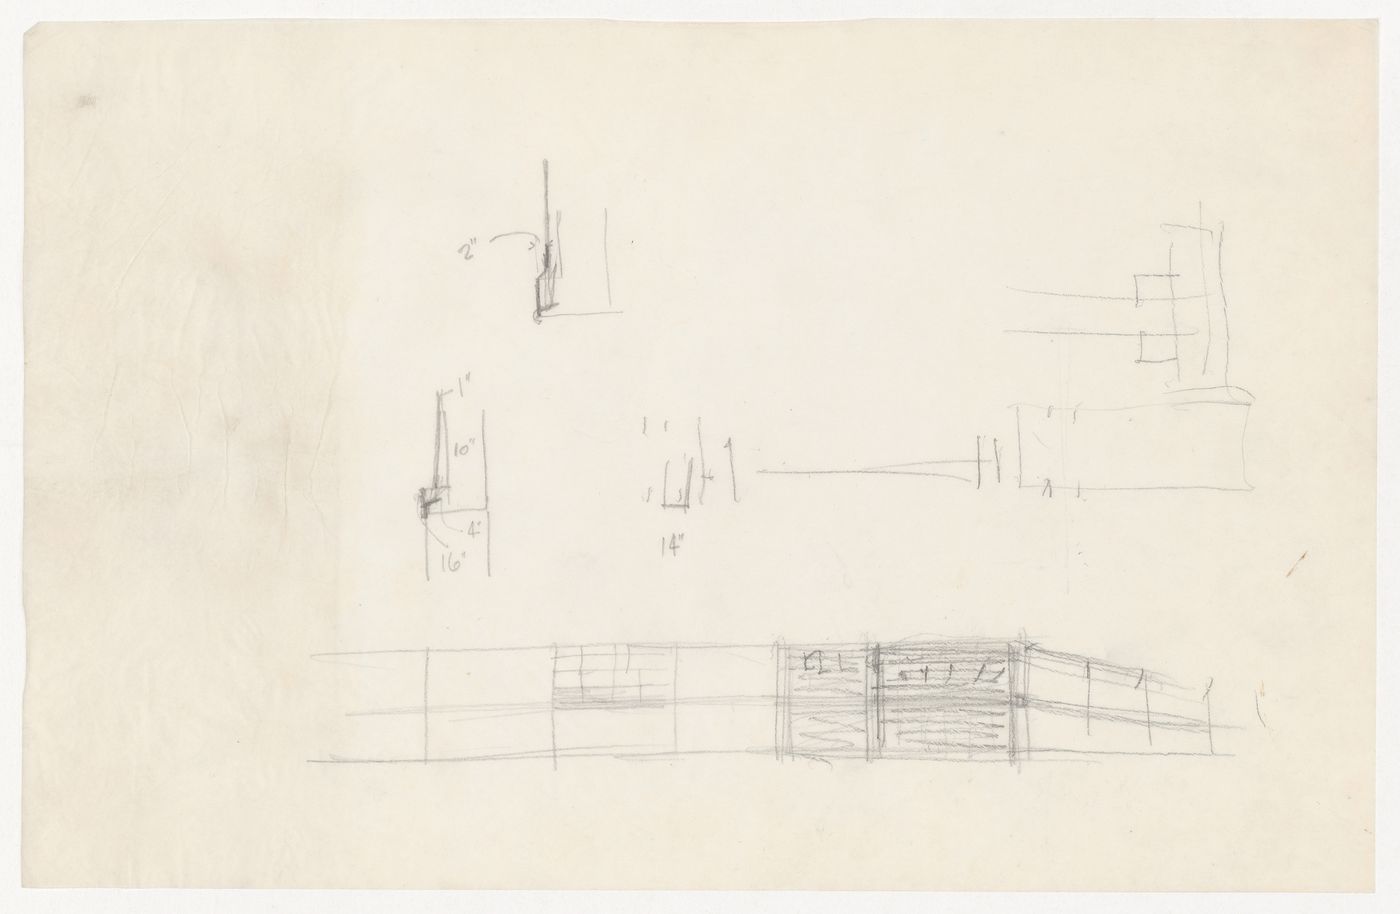 Perspective sketch and sketch sectional details for the Metallurgy Building, Illinois Institute of Technology, Chicago